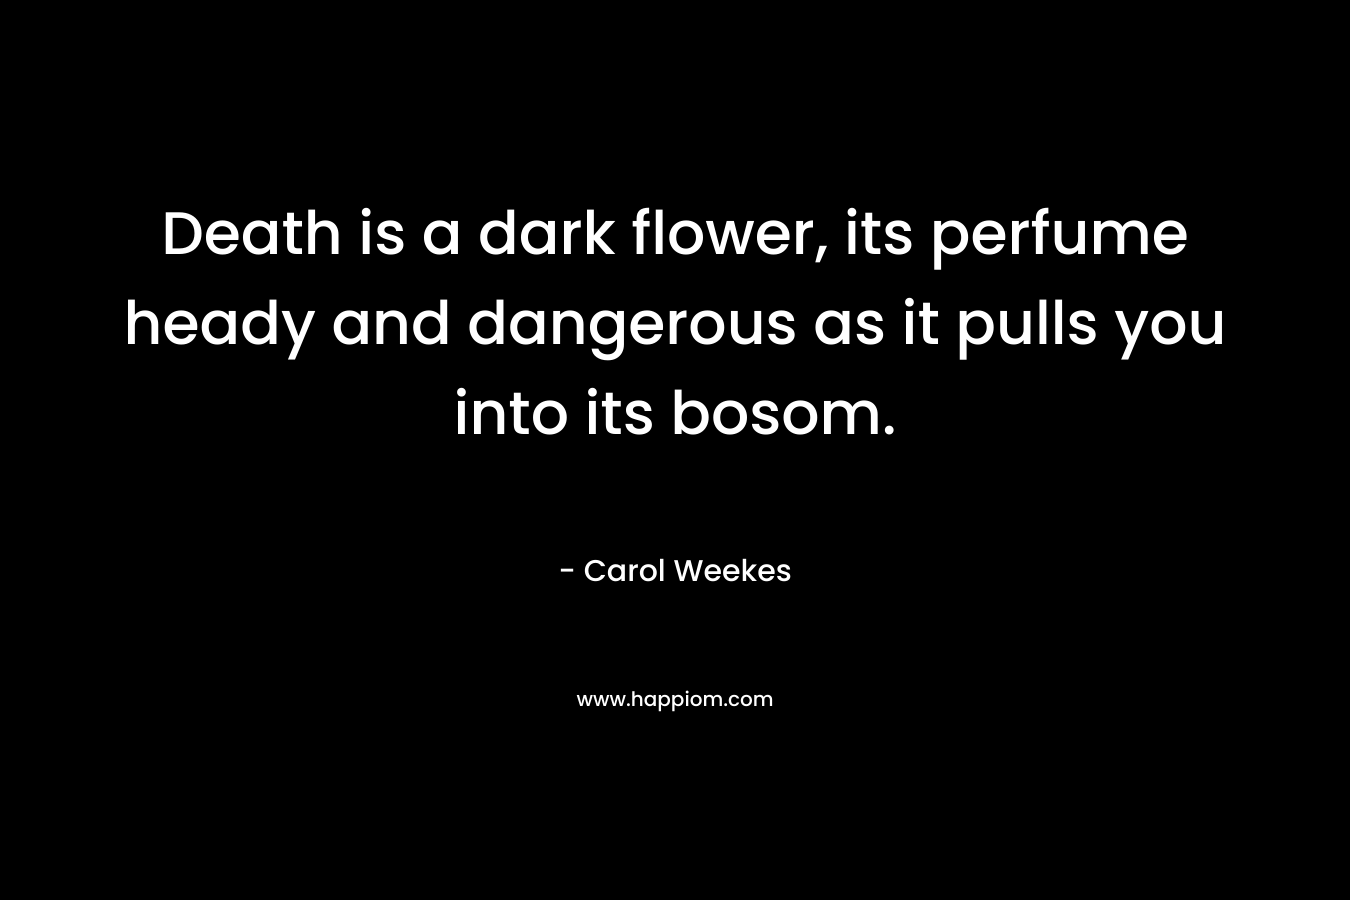 Death is a dark flower, its perfume heady and dangerous as it pulls you into its bosom. – Carol Weekes